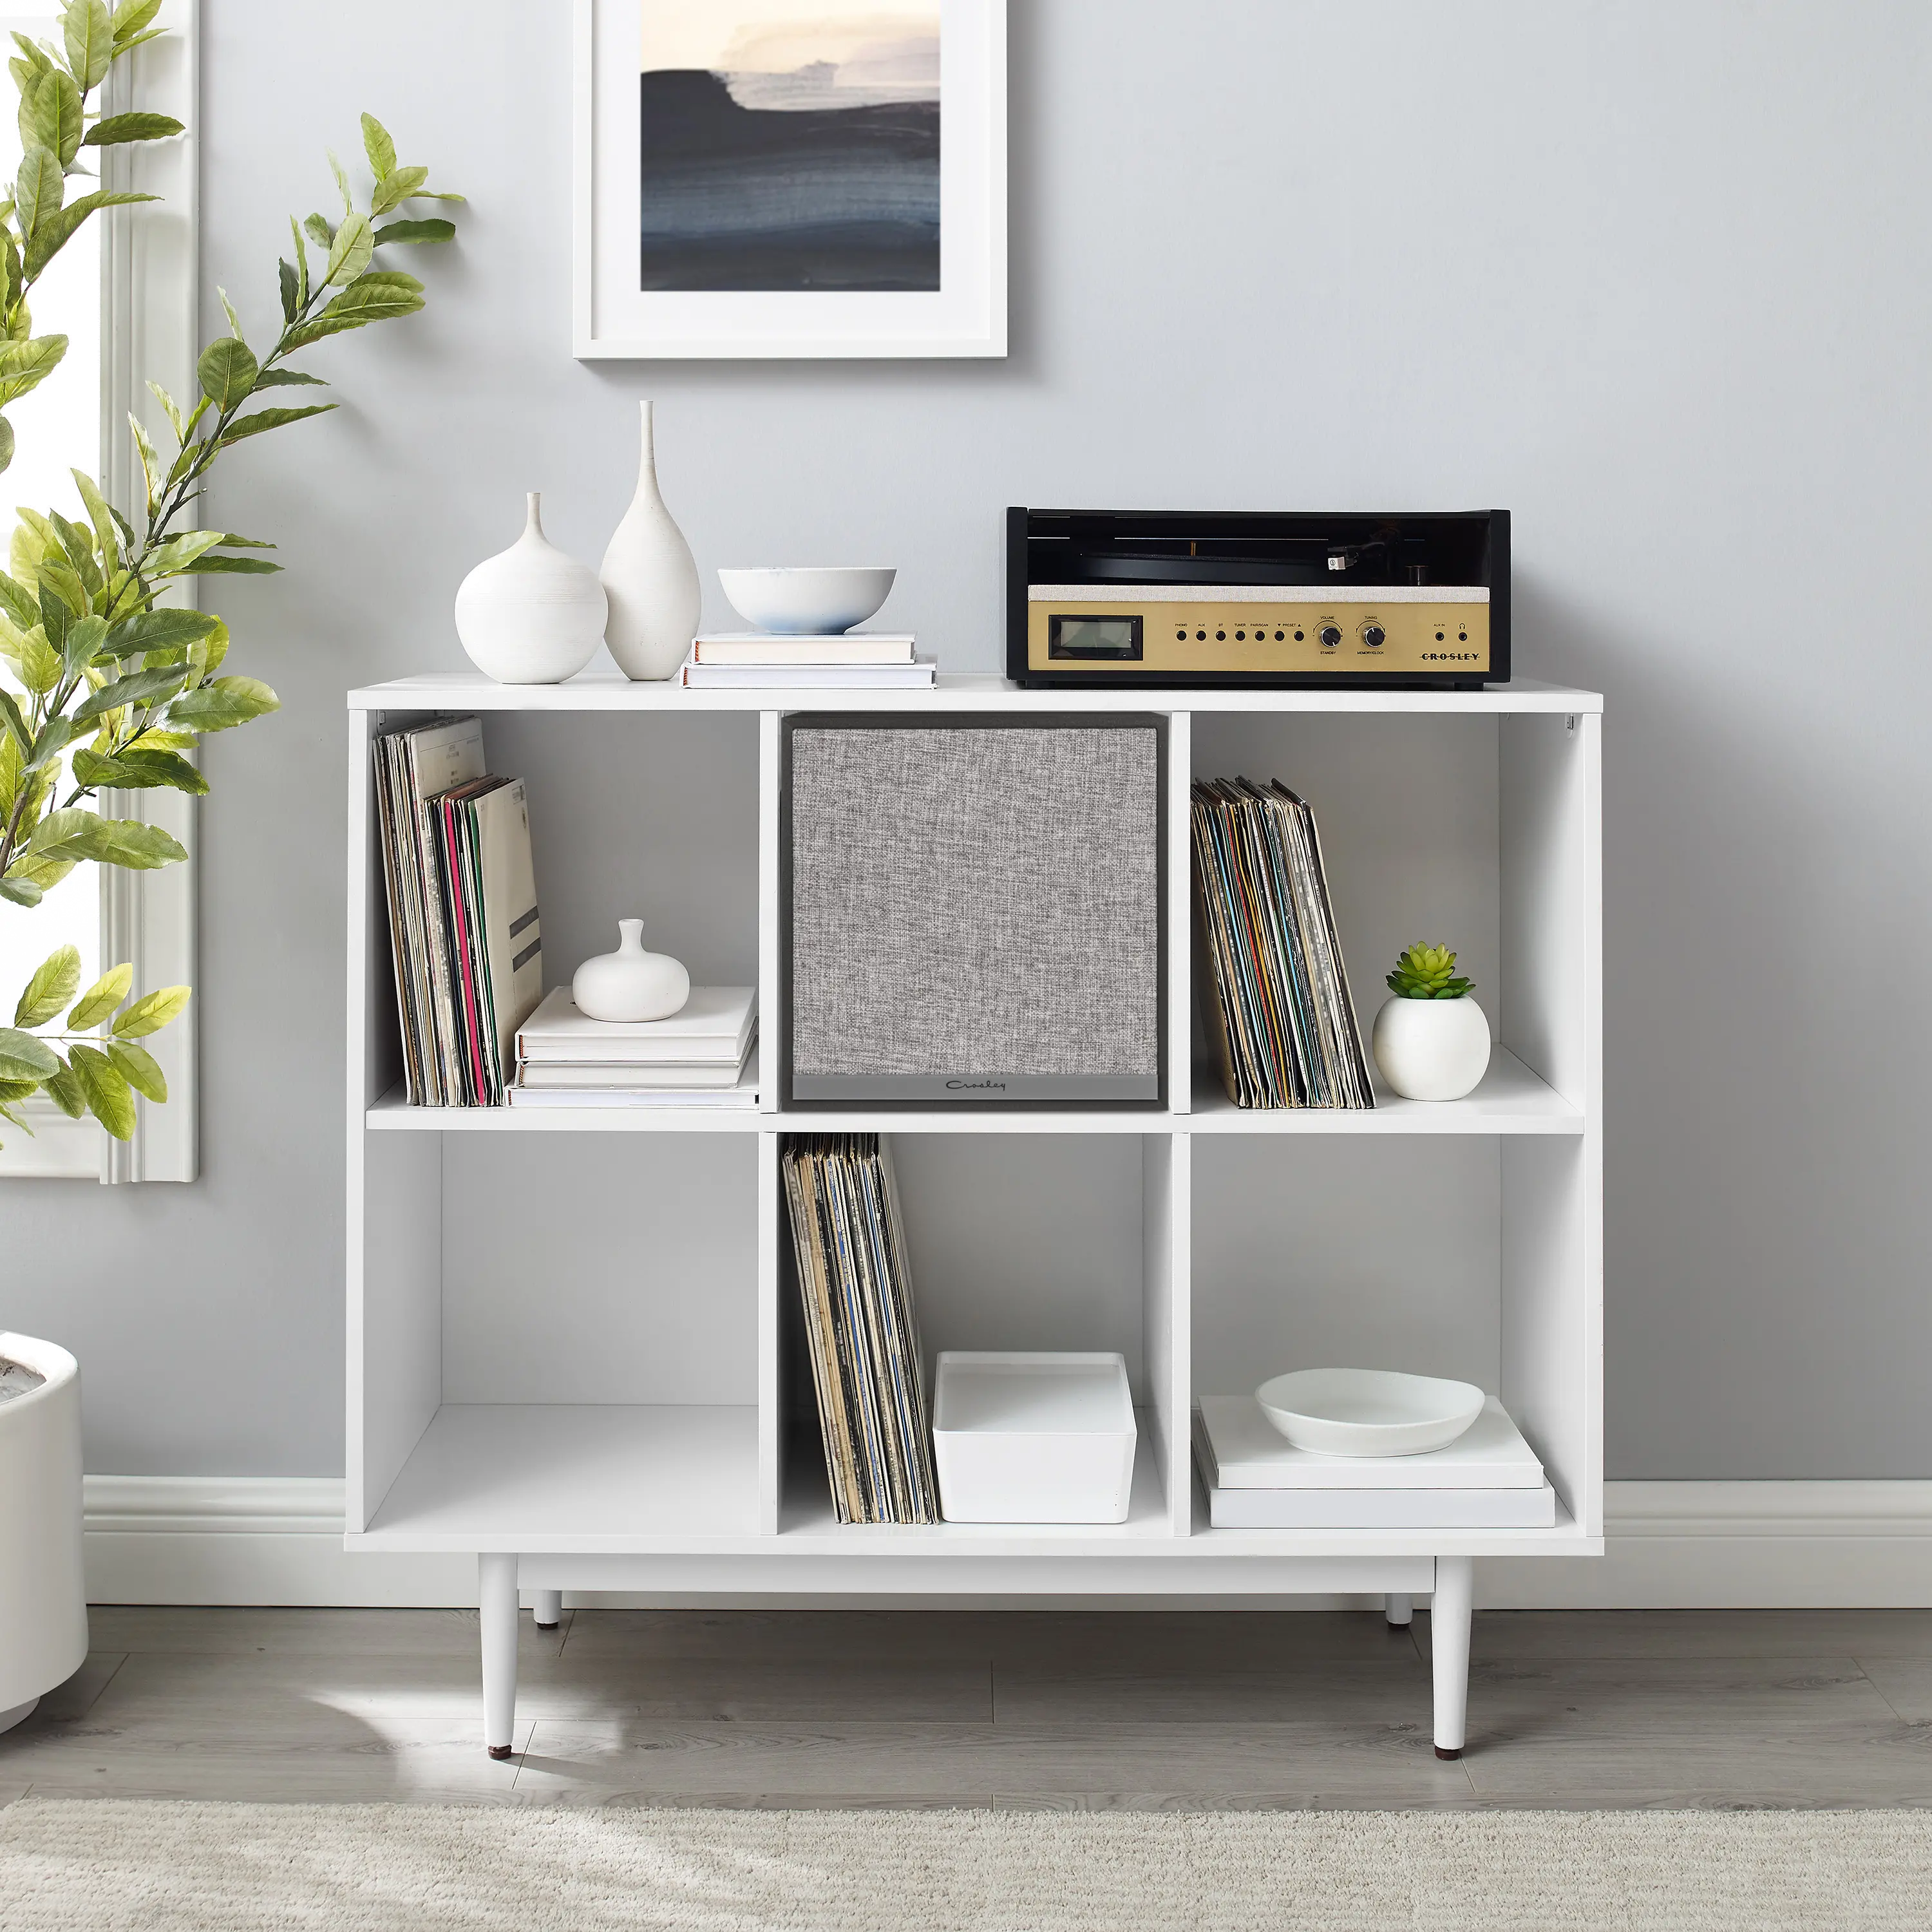 KF13120WH-BK Liam White 6 Cube Record Storage Bookcase with Spe sku KF13120WH-BK